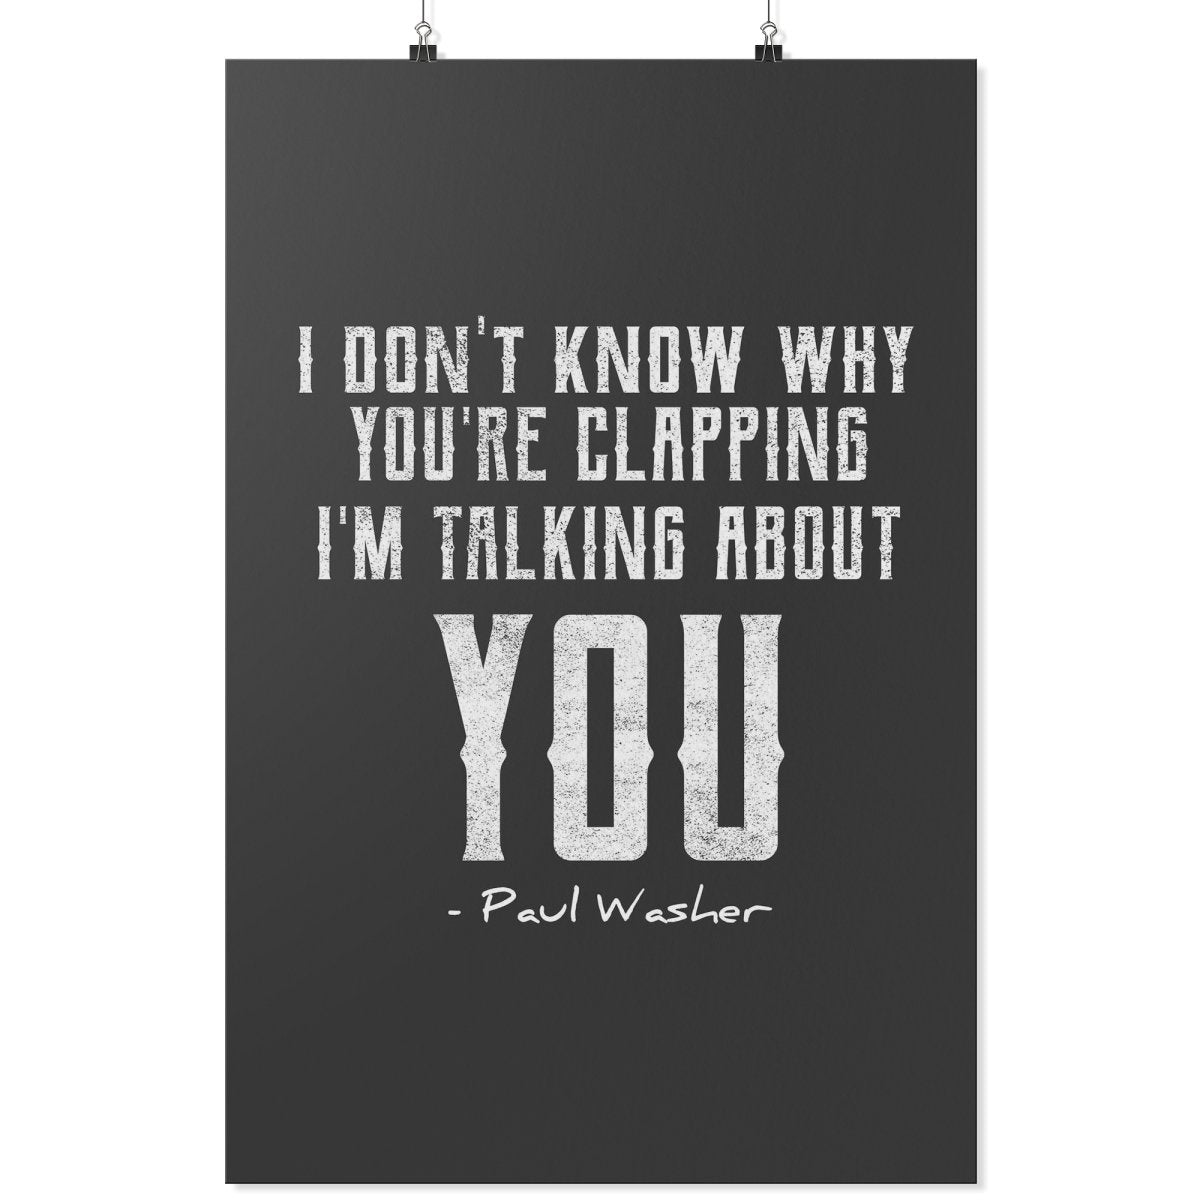 I Don't Know Why You're Claping (Wall Poster) - SDG Clothing